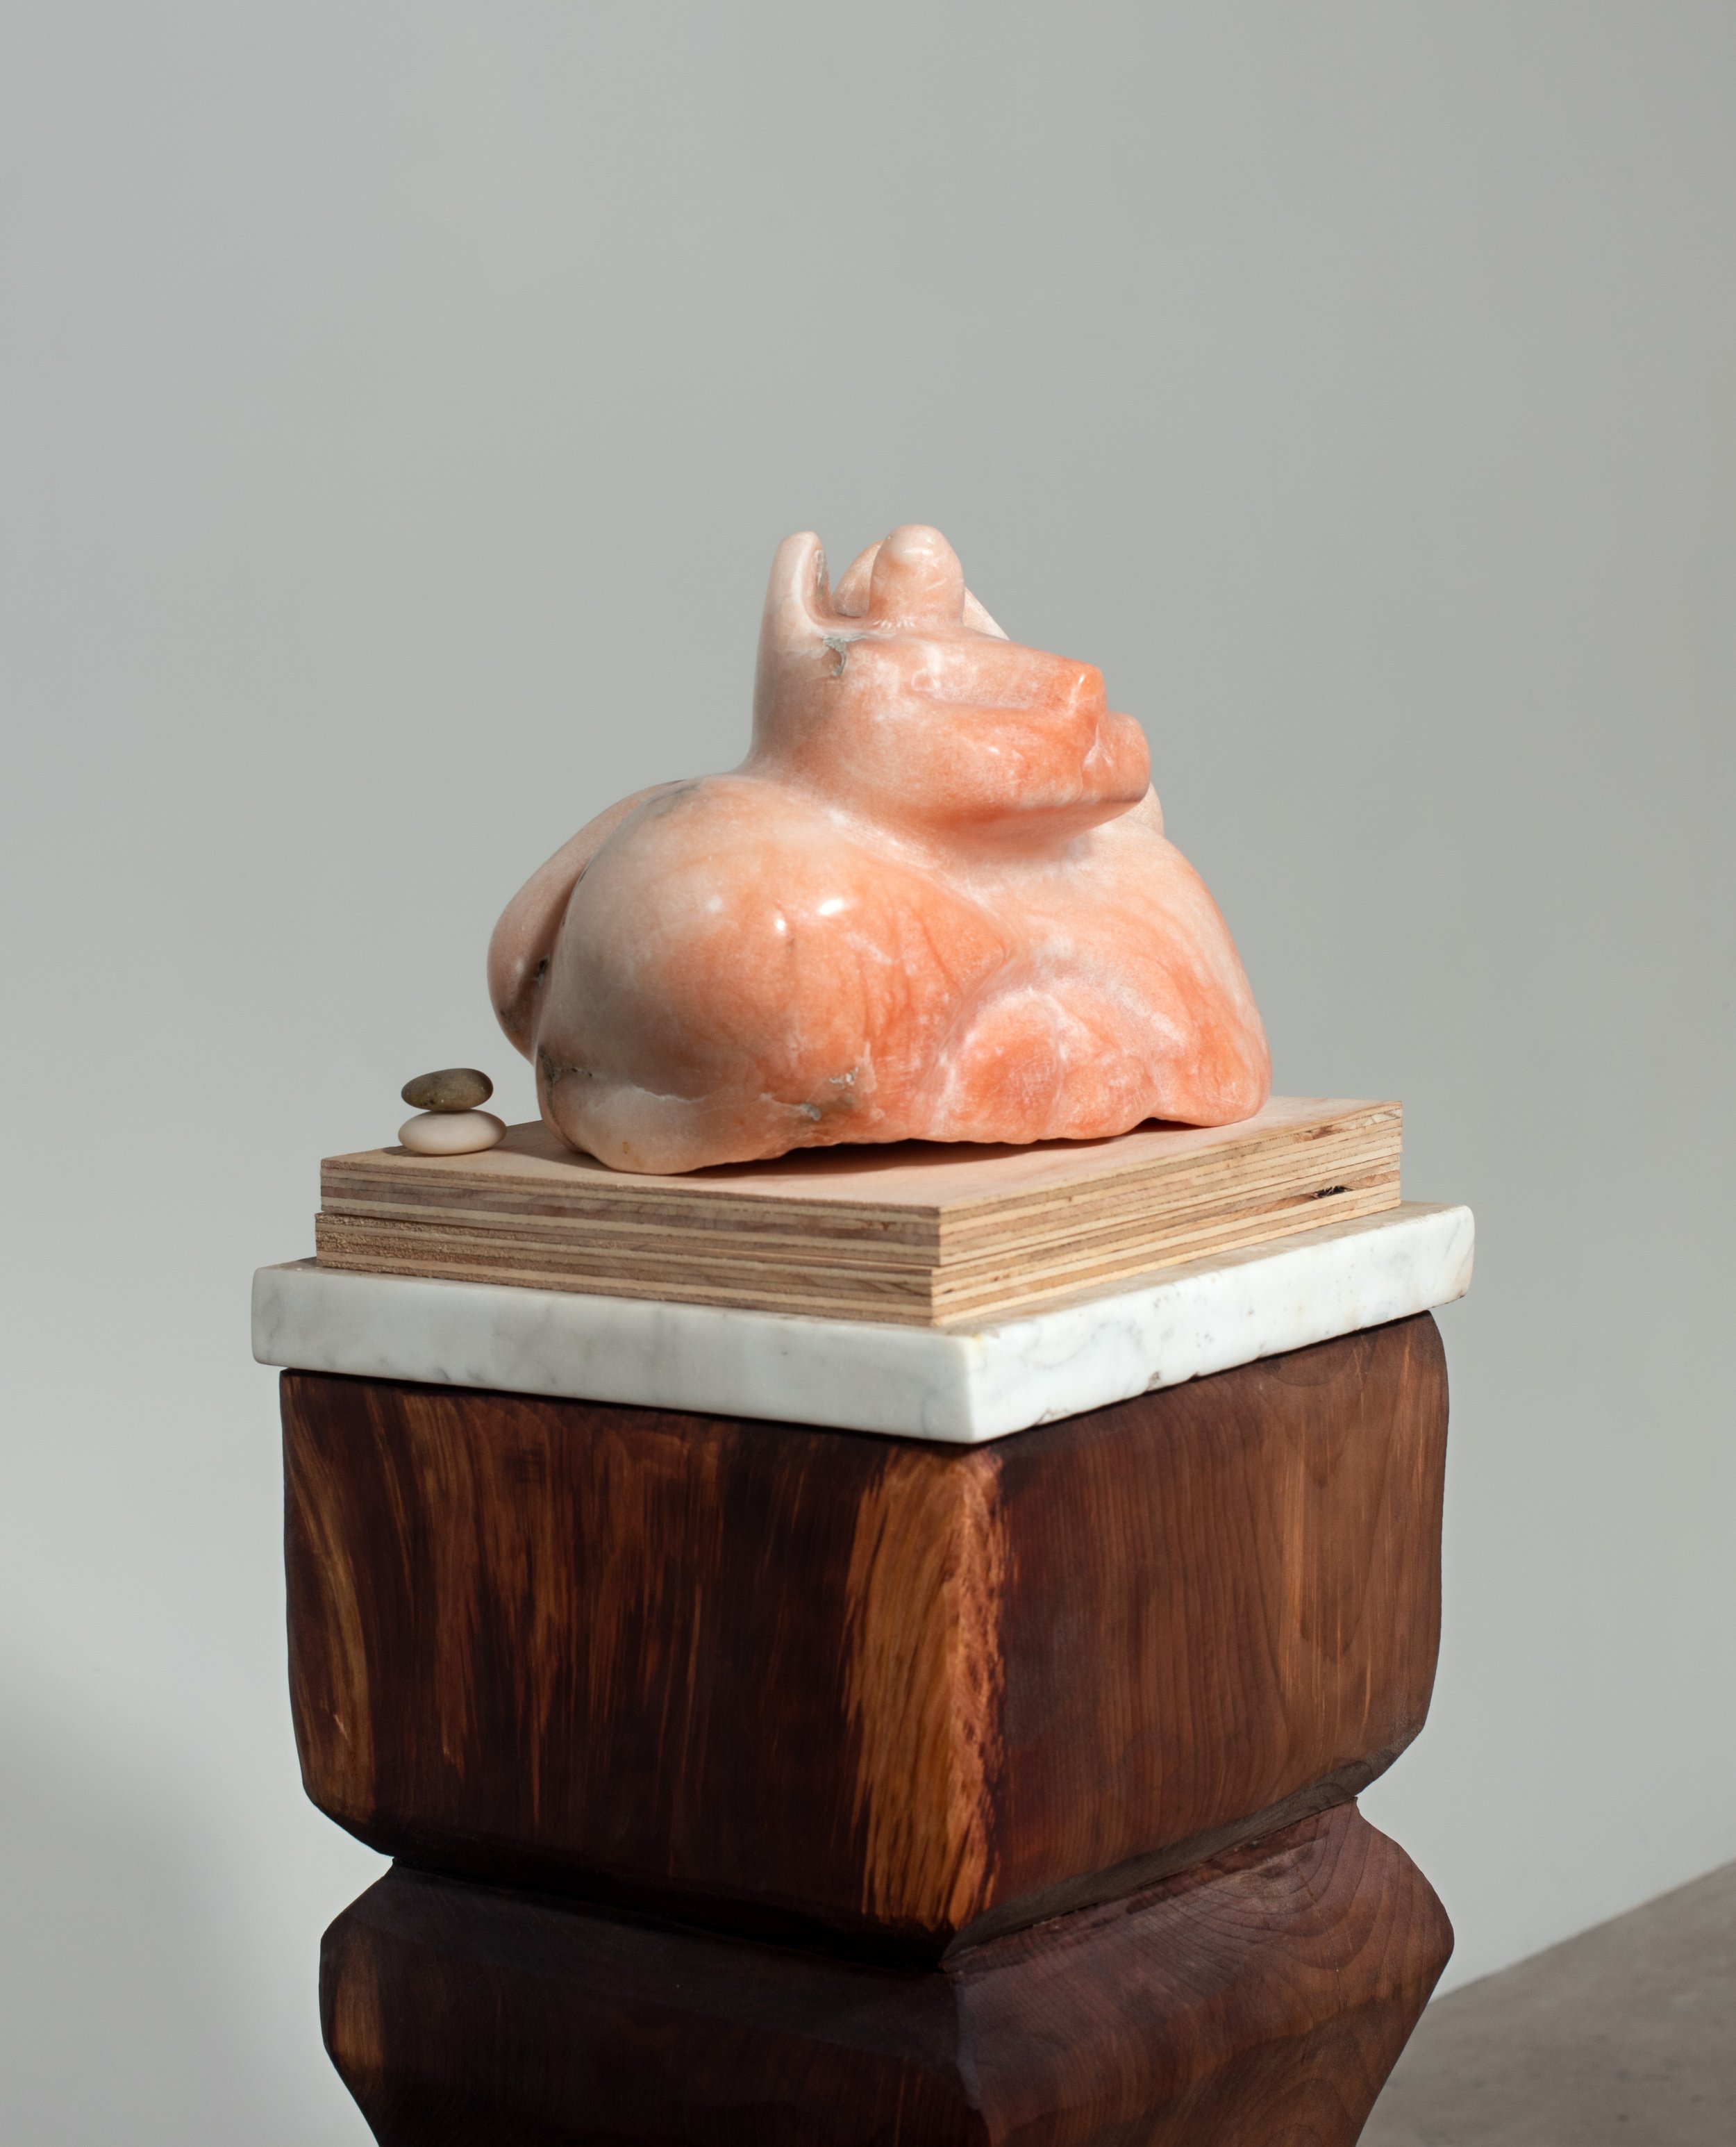   Long Pink Moments  (detail), 2020 Wood, marble, alabaster, and stones 63 1/2 x 12 1/4 x 12 inches&nbsp; 